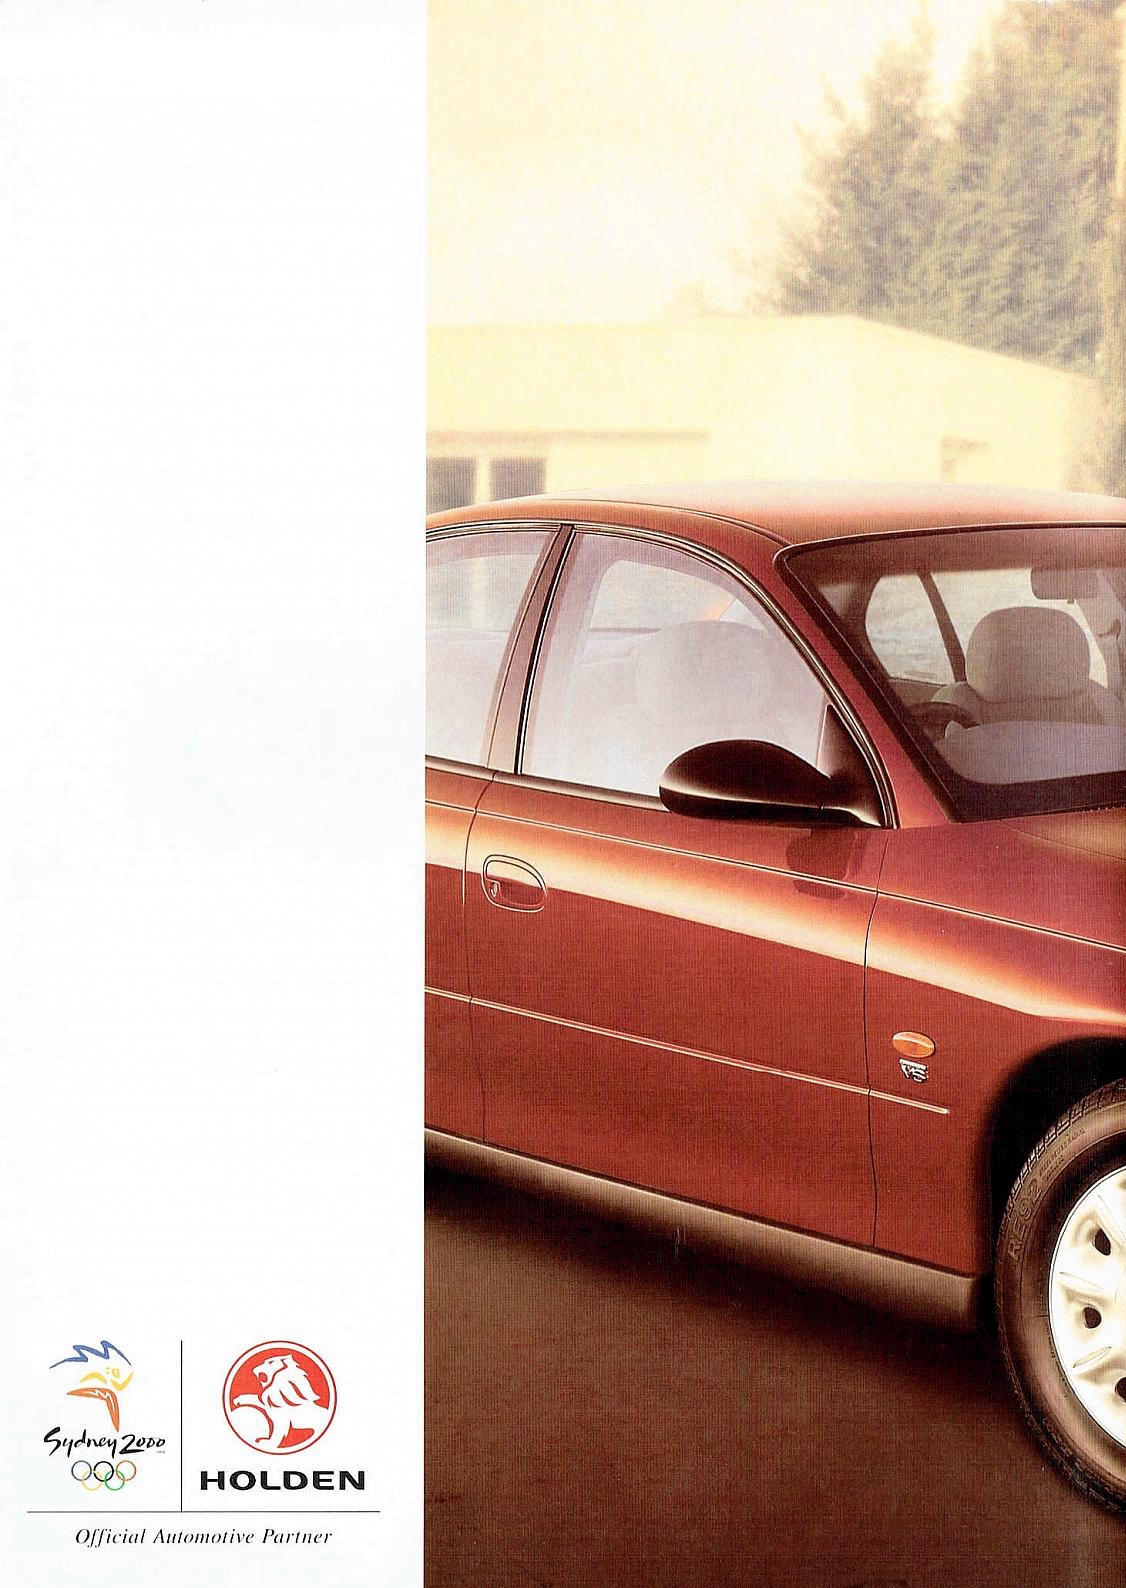 1997 Holden VT Commodore Brochure Page 5